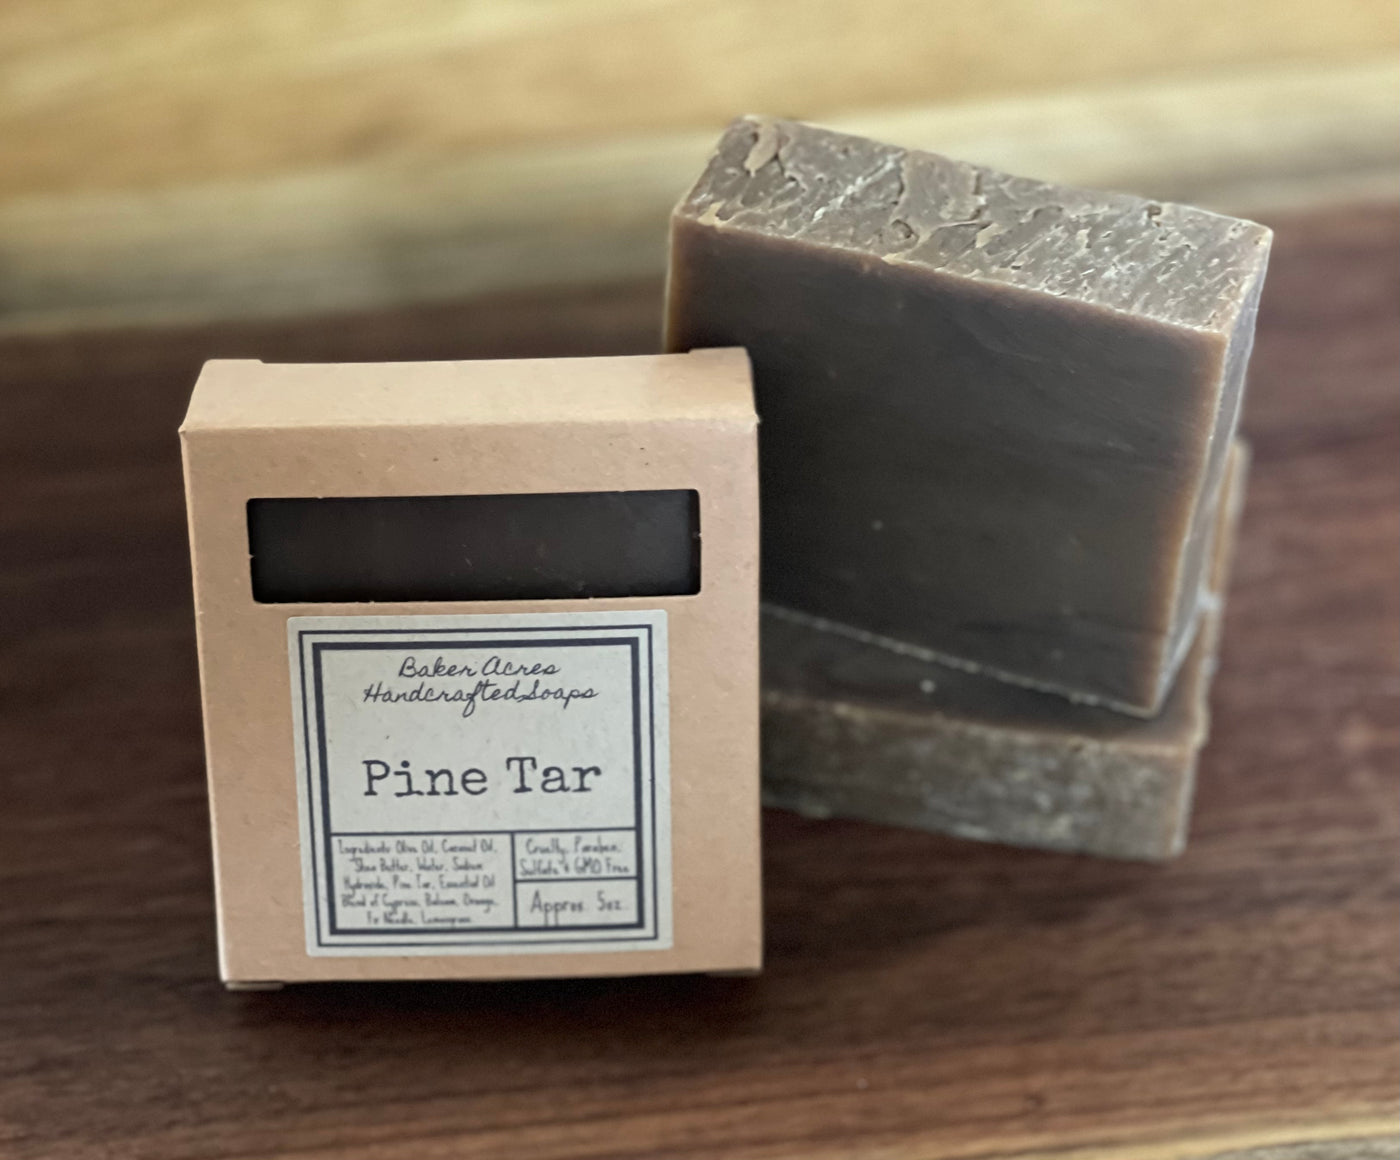 Pine Tar Handcrafted Soap